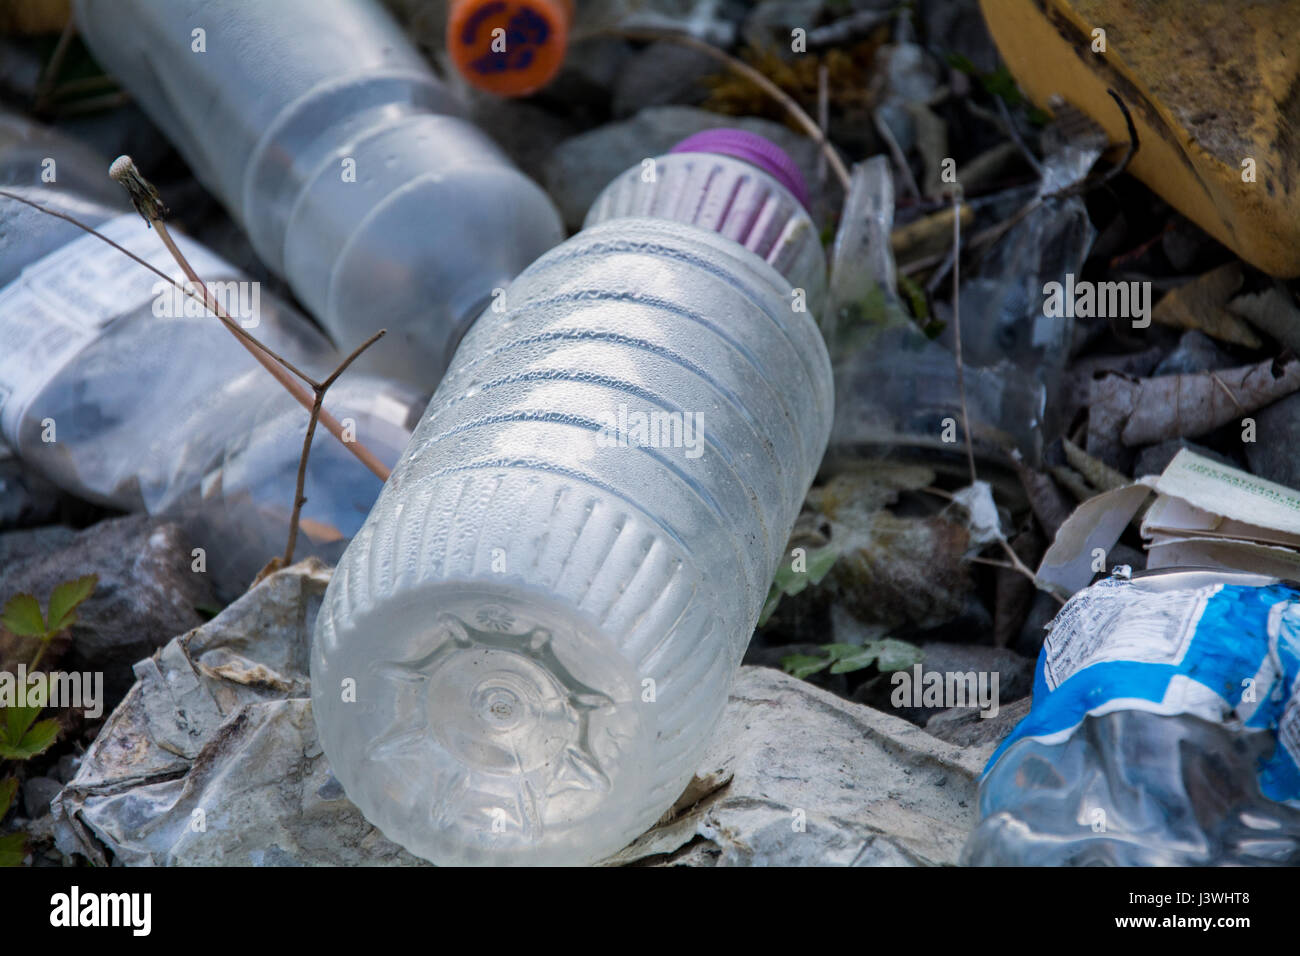 An image of rubbish that's been fly tipped, with the focus on an empty drinks bottle. It represents environmental issues such as plastic pollution. UK Stock Photo